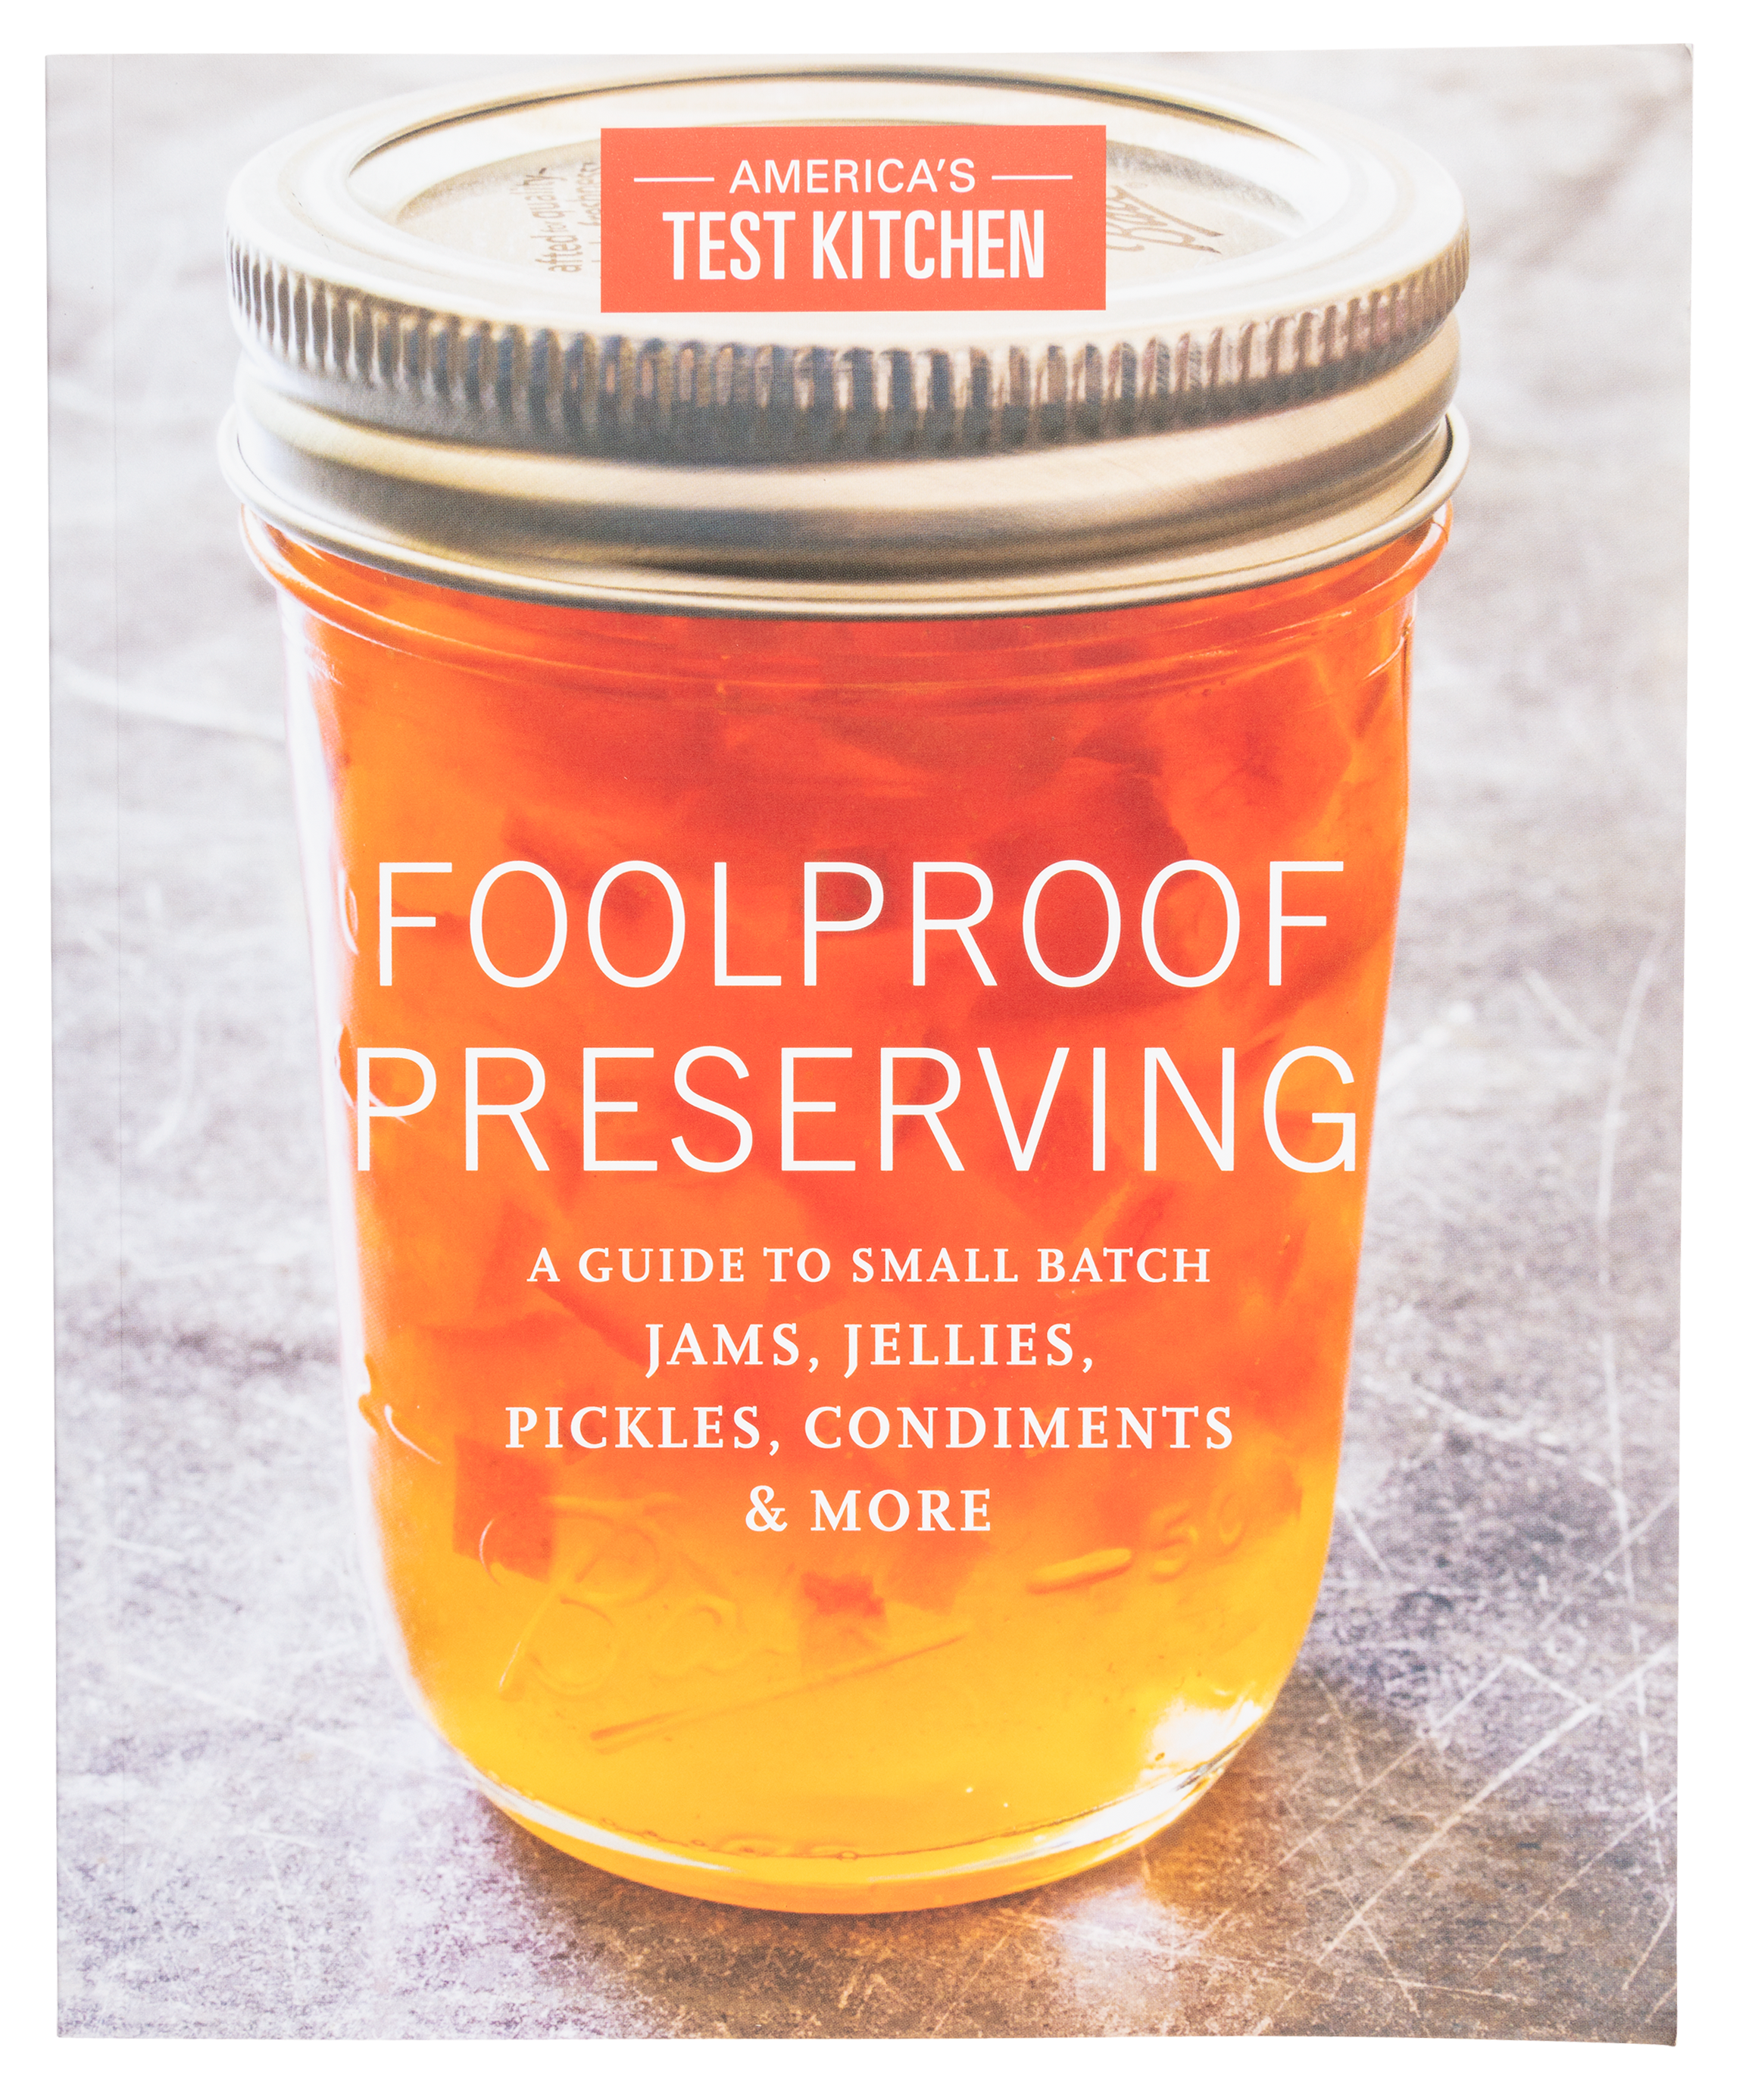 Foolproof Preserving: A Guide to Small Batch Jams, Jellies, Pickles, Condiments, and More Cookbook by America's Test Kitchen